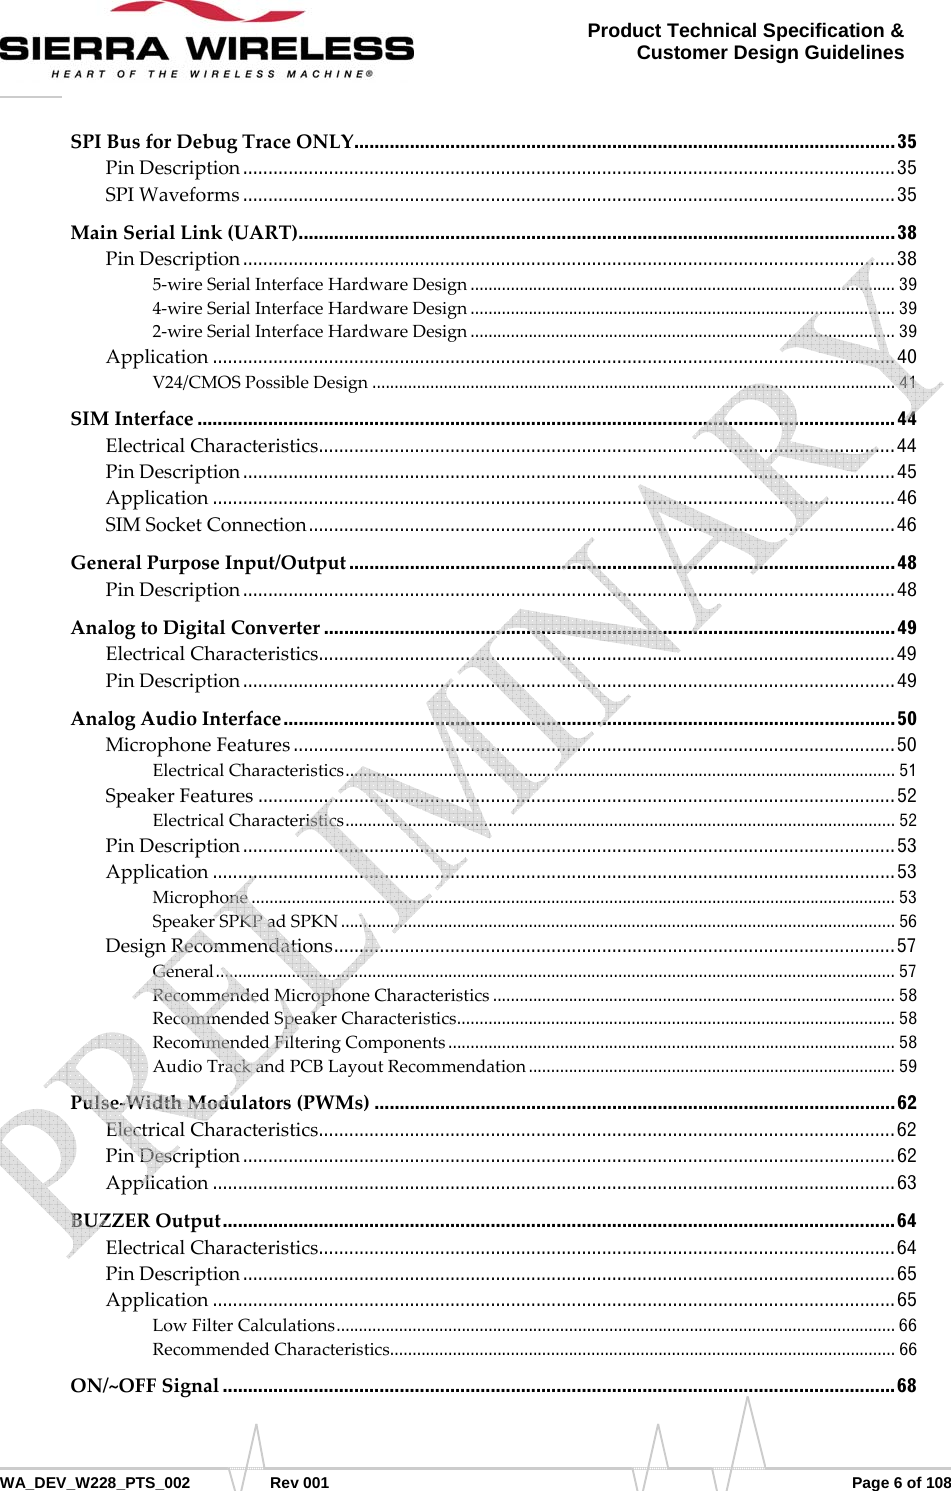      WA_DEV_W228_PTS_002 Rev 001  Page 6 of 108 Product Technical Specification &amp; Customer Design Guidelines SPIBusforDebugTraceONLY ......... ....... ...... ....... ....... ........ ....... ....... ...... ......... ....... ...... ....... ...... ........ 35 PinDescription ................................................................................................................................. 35 SPIWaveforms ................................................................................................................................. 35 MainSerialLink(UART) ................ .... ....... .... ..... .... .... ..... .... ....... .... ..... .... .... ..... ...... ..... .... .... ..... .... ..... ... 38 PinDescription ................................................................................................................................. 38 5‐wireSerialInterfaceHardwareDesign ............................................................................................... 39 4‐wireSerialInterfaceHardwareDesign ............................................................................................... 39 2‐wireSerialInterfaceHardwareDesign ............................................................................................... 39 Application ....................................................................................................................................... 40 V24/CMOSPossibleDesign ..................................................................................................................... 41 SIMInterface .......................................................................................................................................... 44 ElectricalCharacteristics ............ ...... ....... ......... ...... ....... ....... ........ ....... ....... ...... ....... ........ ....... ....... ... 44 PinDescription ................................................................................................................................. 45 Application ....................................................................................................................................... 46 SIMSocketConnection .................................................................................................................... 46 GeneralPurposeInput/Output ............................................................................................................ 48 PinDescription ................................................................................................................................. 48 AnalogtoDigitalConverter ................................................................................................................. 49 ElectricalCharacteristics ............ ...... ....... ......... ...... ....... ....... ........ ....... ....... ...... ....... ........ ....... ....... ... 49 PinDescription ................................................................................................................................. 49 AnalogAudioInterface ......................................................................................................................... 50 MicrophoneFeatures ....................................................................................................................... 50 ElectricalCharacteristics ...........................................................................................................................  51 SpeakerFeatures .............................................................................................................................. 52 ElectricalCharacteristics ...........................................................................................................................  52 PinDescription ................................................................................................................................. 53 Application ....................................................................................................................................... 53 Microphone ................................................................................................................................................ 53 SpeakerSPKPadSPKN ............................................................................................................................ 56 DesignRecommendations ........... .................. ................... .................. .................... ................. ........  57 General ........................................................................................................................................................ 57 RecommendedMicrophoneCharacteristics .......................................................................................... 58 RecommendedSpeakerCharacteristics ..................................................................................................  58 RecommendedFilteringComponents .................................................................................................... 58 AudioTrackandPCBLayoutRecommendation .................................................................................. 59 Pulse‐WidthModulators(PWMs) ....................................................................................................... 62 ElectricalCharacteristics ............ ...... ....... ......... ...... ....... ....... ........ ....... ....... ...... ....... ........ ....... ....... ... 62 PinDescription ................................................................................................................................. 62 Application ....................................................................................................................................... 63 BUZZEROutput ..................................................................................................................................... 64 ElectricalCharacteristics ............ ...... ....... ......... ...... ....... ....... ........ ....... ....... ...... ....... ........ ....... ....... ... 64 PinDescription ................................................................................................................................. 65 Application ....................................................................................................................................... 65 LowFilterCalculations .............................................................................................................................  66 RecommendedCharacteristics ................................................................................................................. 66 ON/~OFFSignal ..................................................................................................................................... 68    